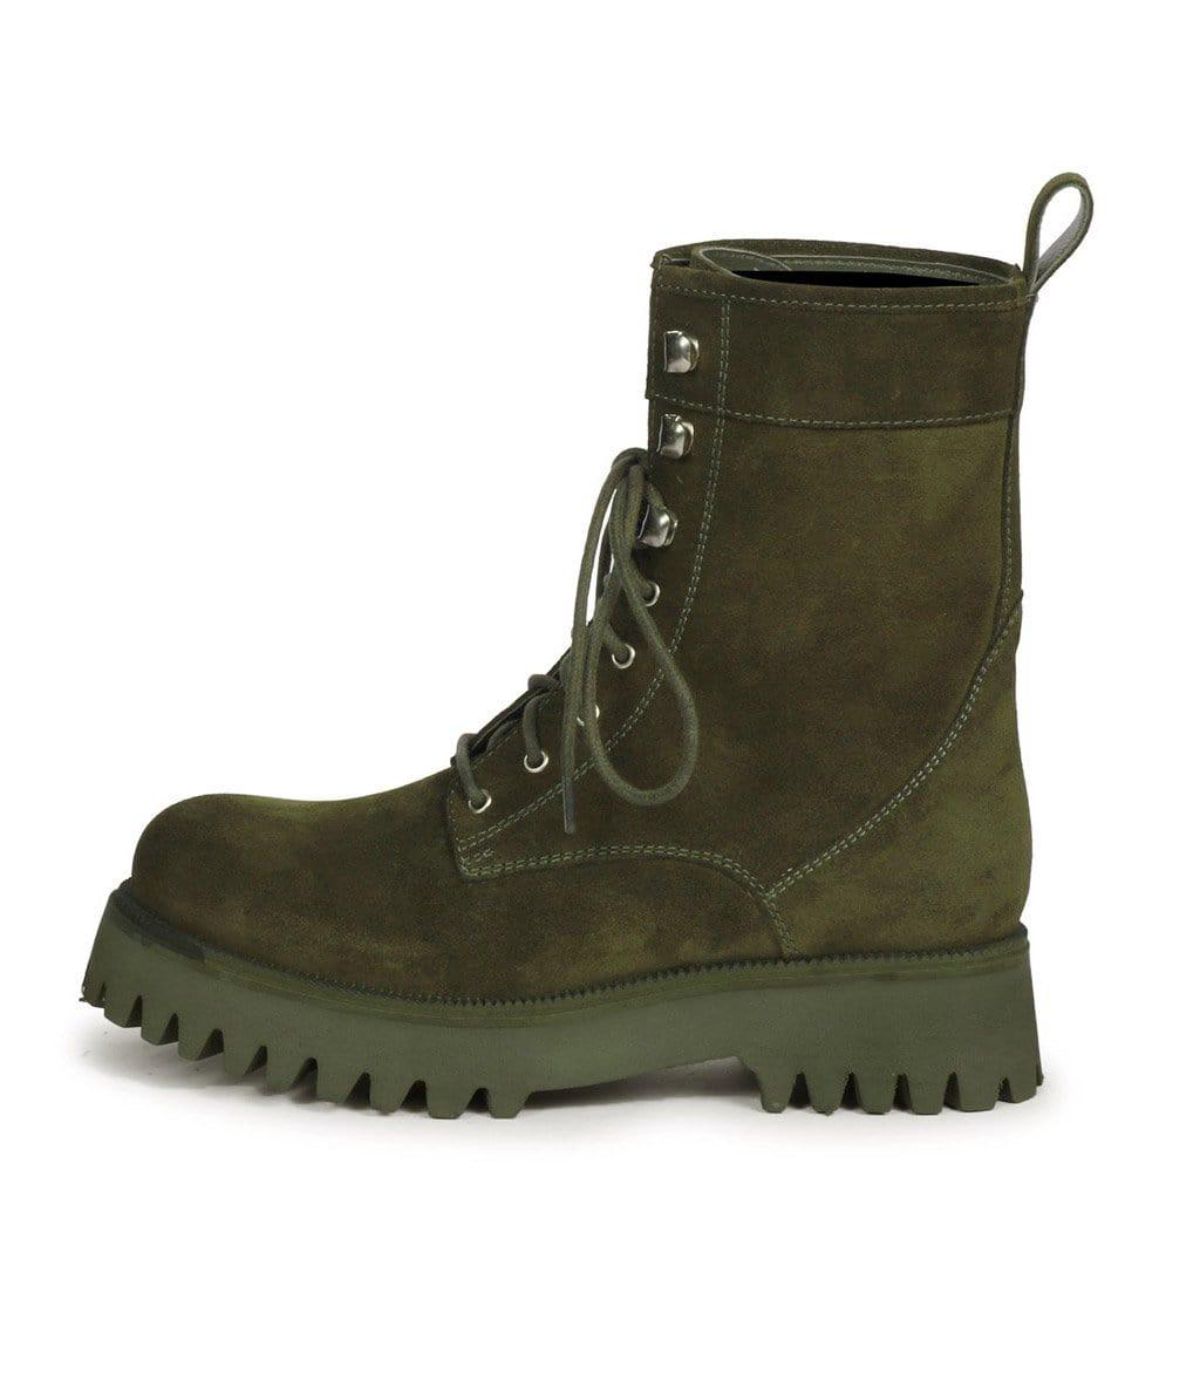 Anastasia Suede Leather Lace-up Boots Green